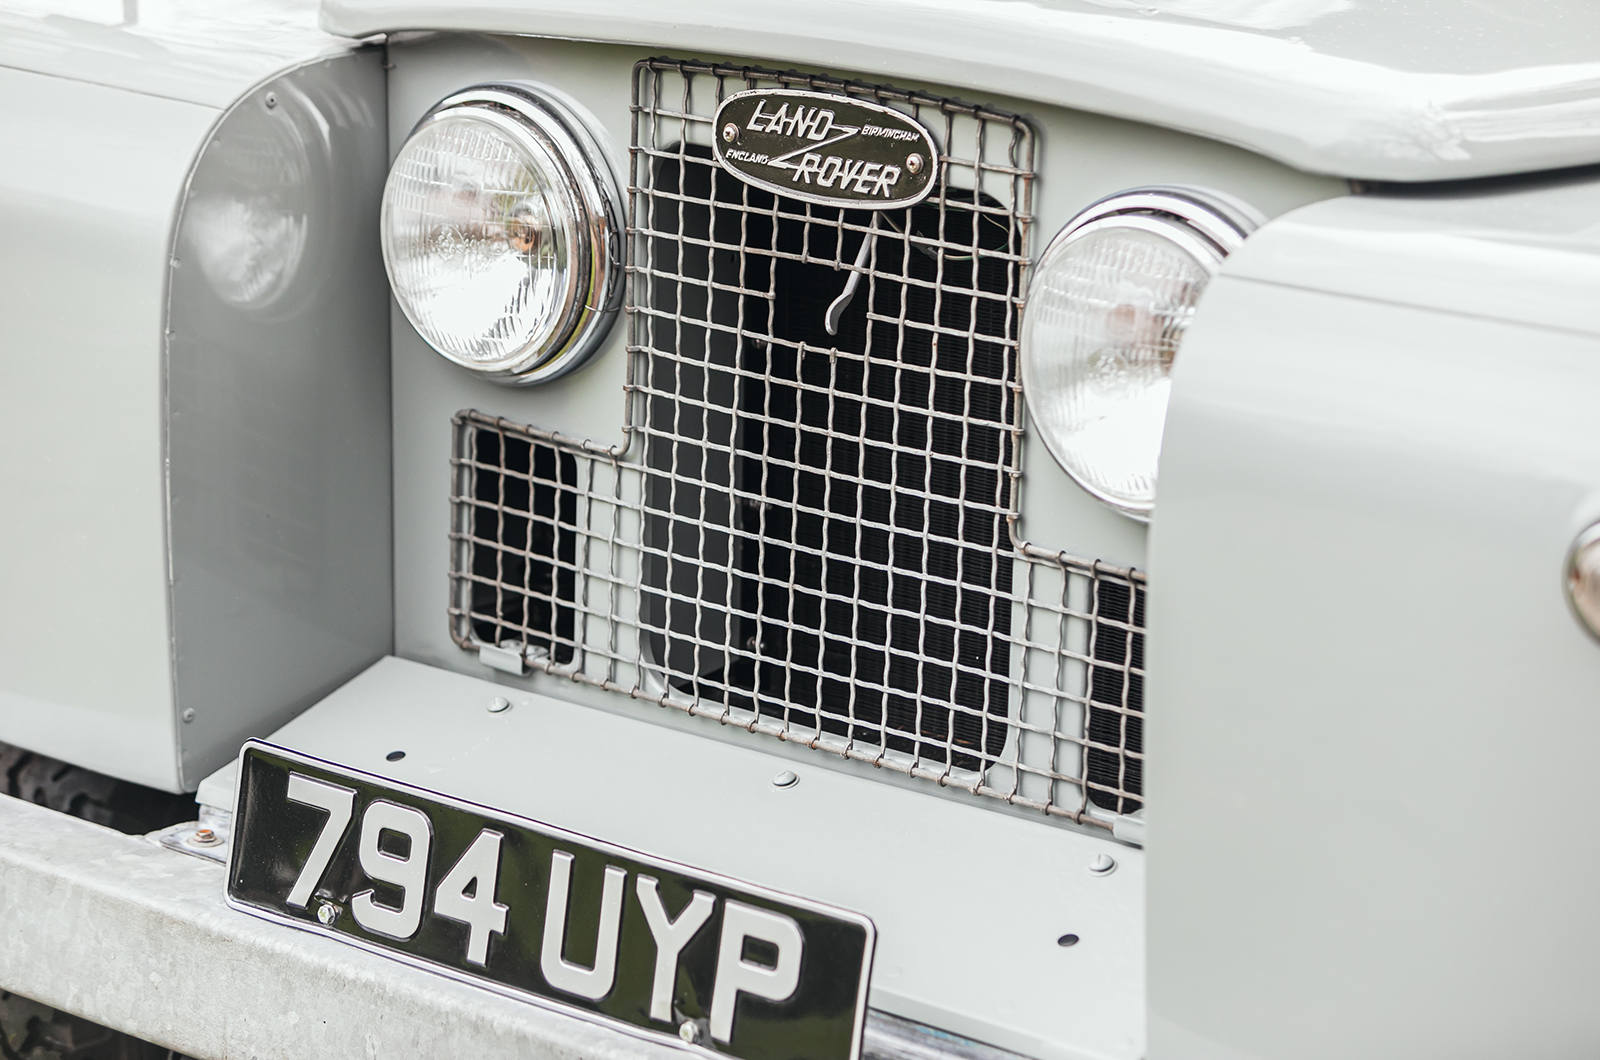 Classic & Sports Car – This super-early Series II Land Rover could be yours